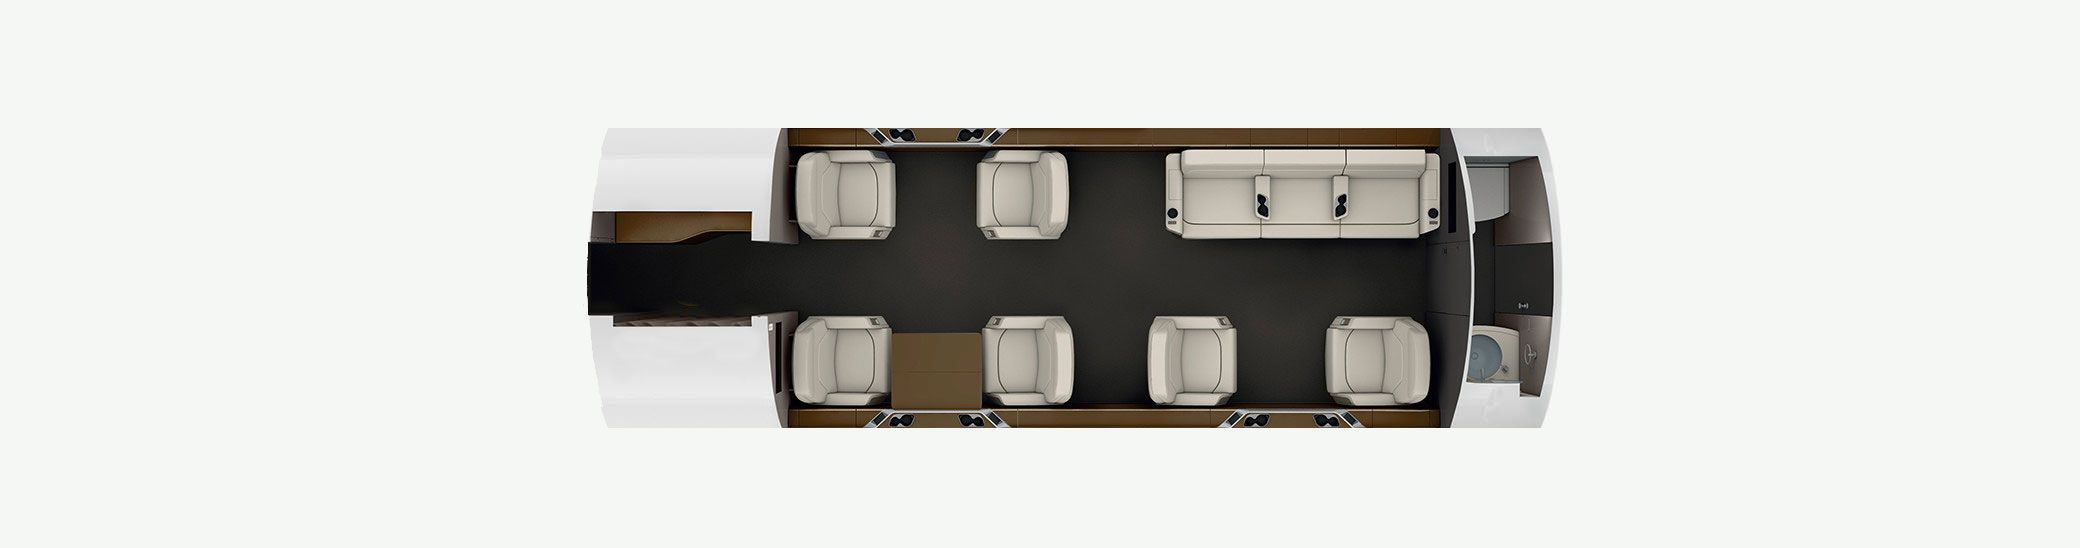 The floorplan of a Bombardier Challenger 650.